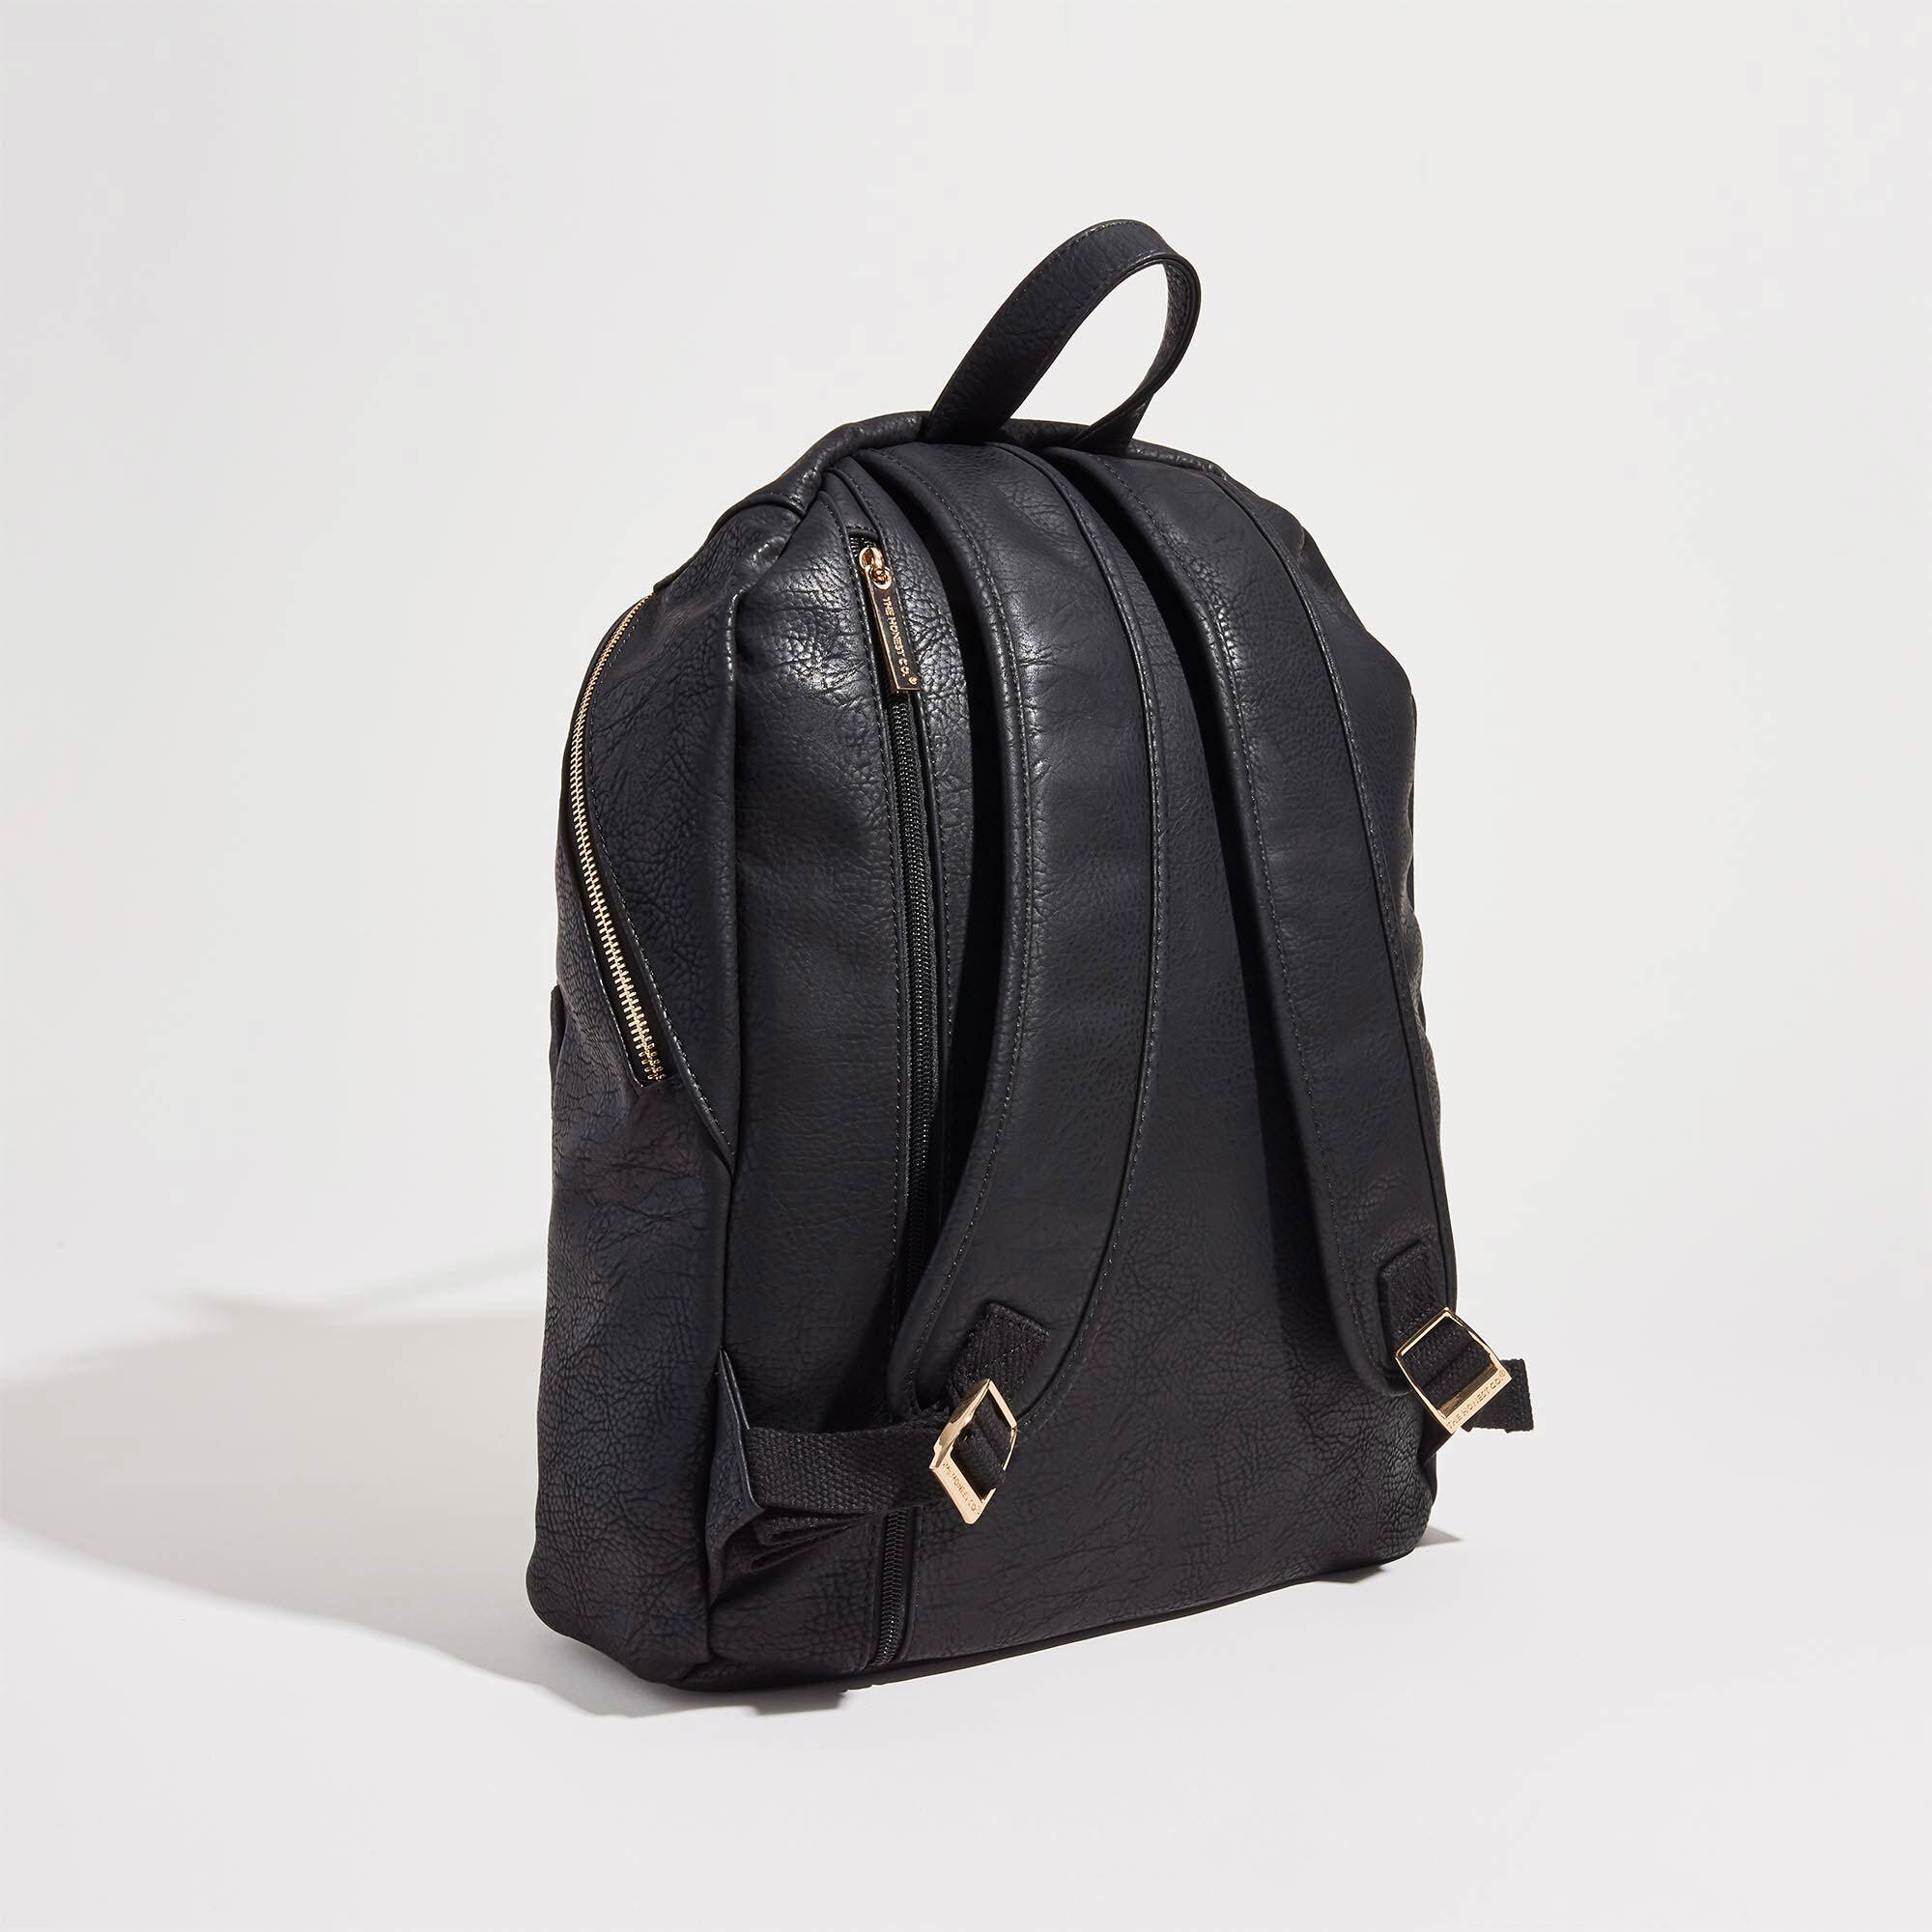 Tuscan's Black Genuine Calf Leather Backpack at FORZIERI